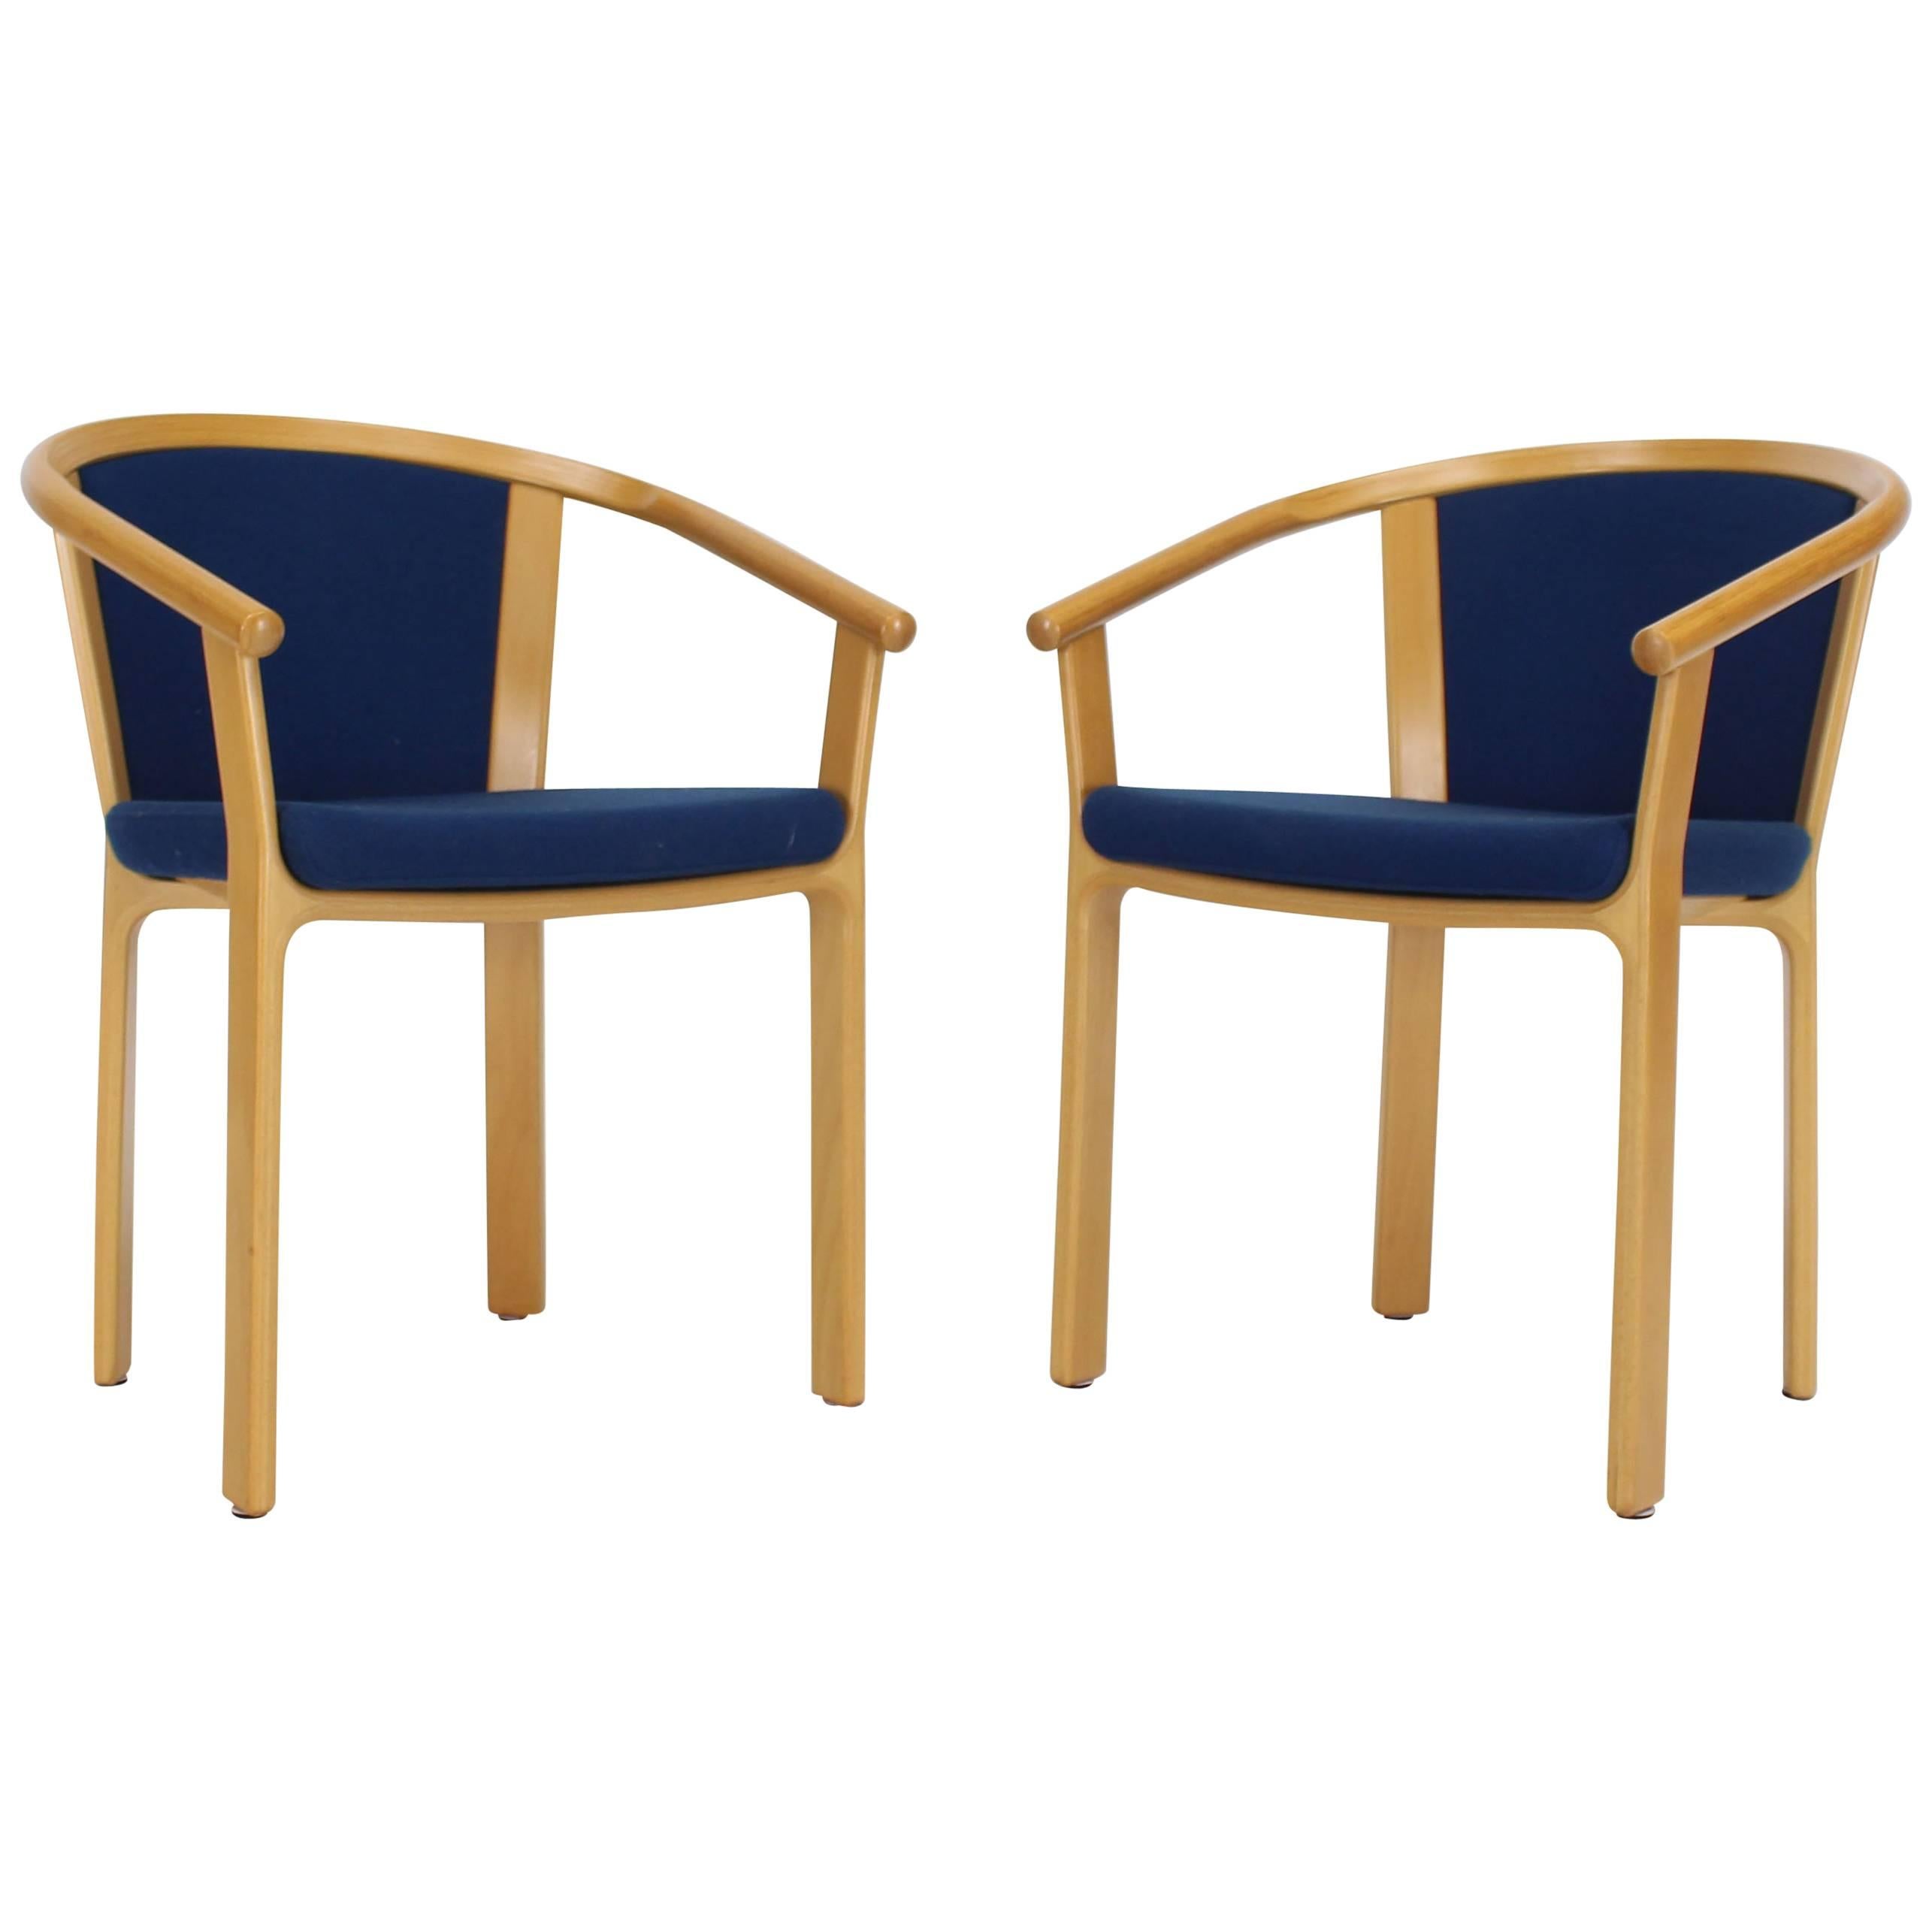 Pair of Danish Modern Barrel Back Chairs For Sale